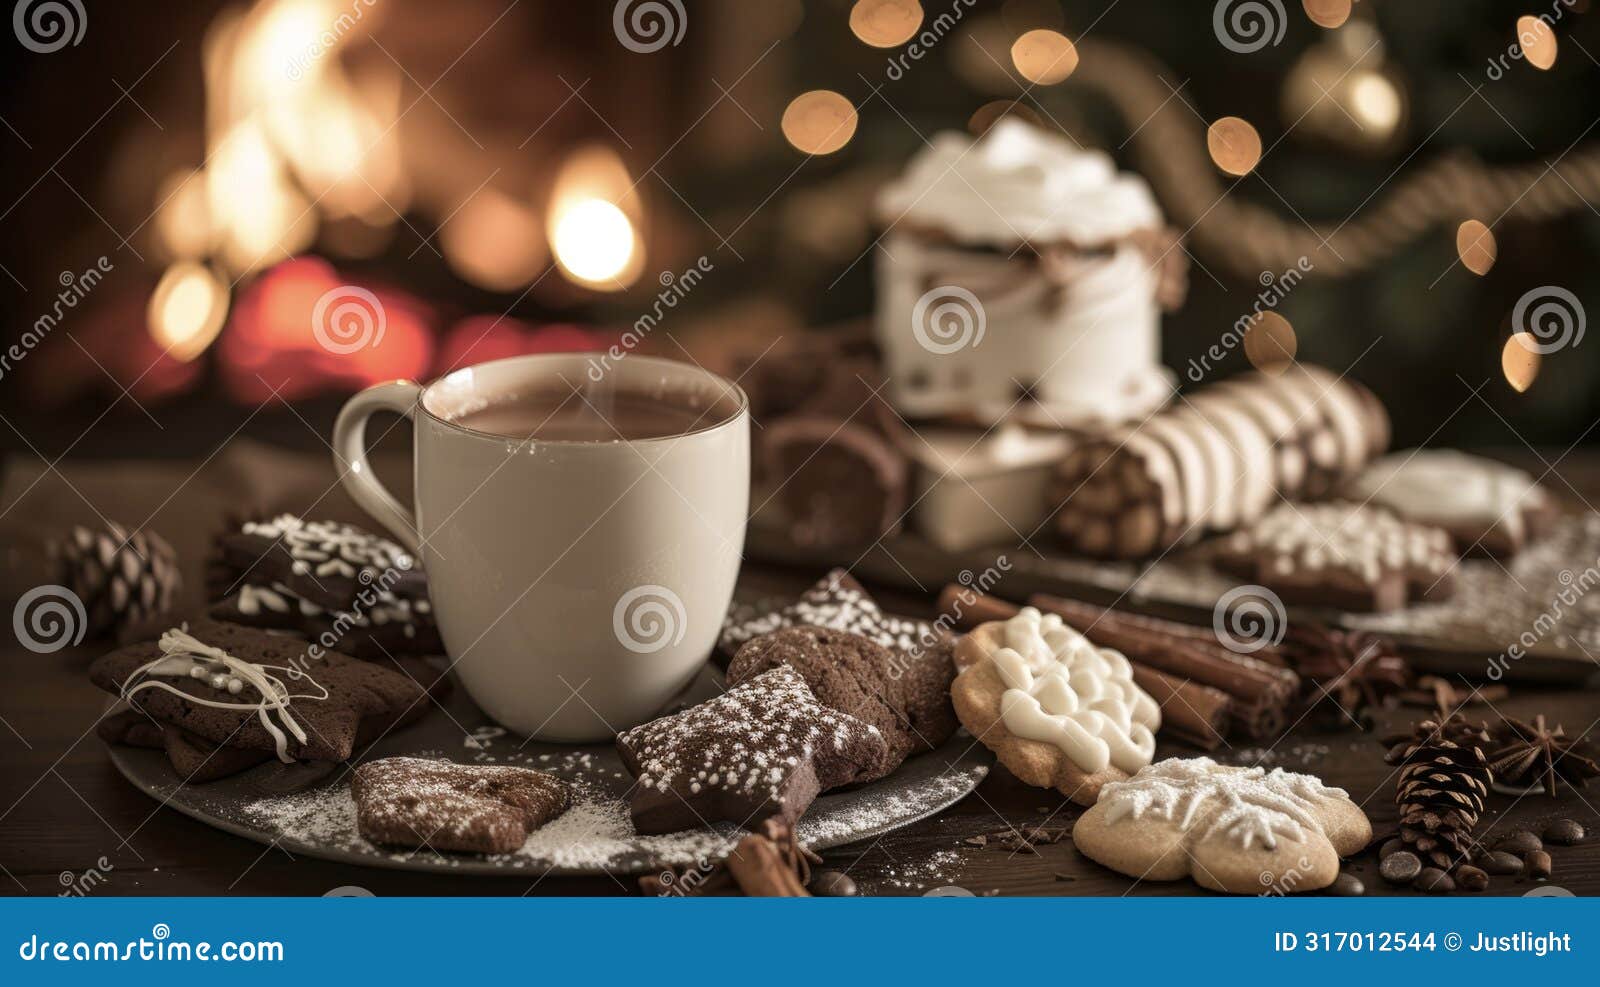 as the snow falls outside theres nothing more inviting than a steaming cup of cocoa and an array of decadent cookies